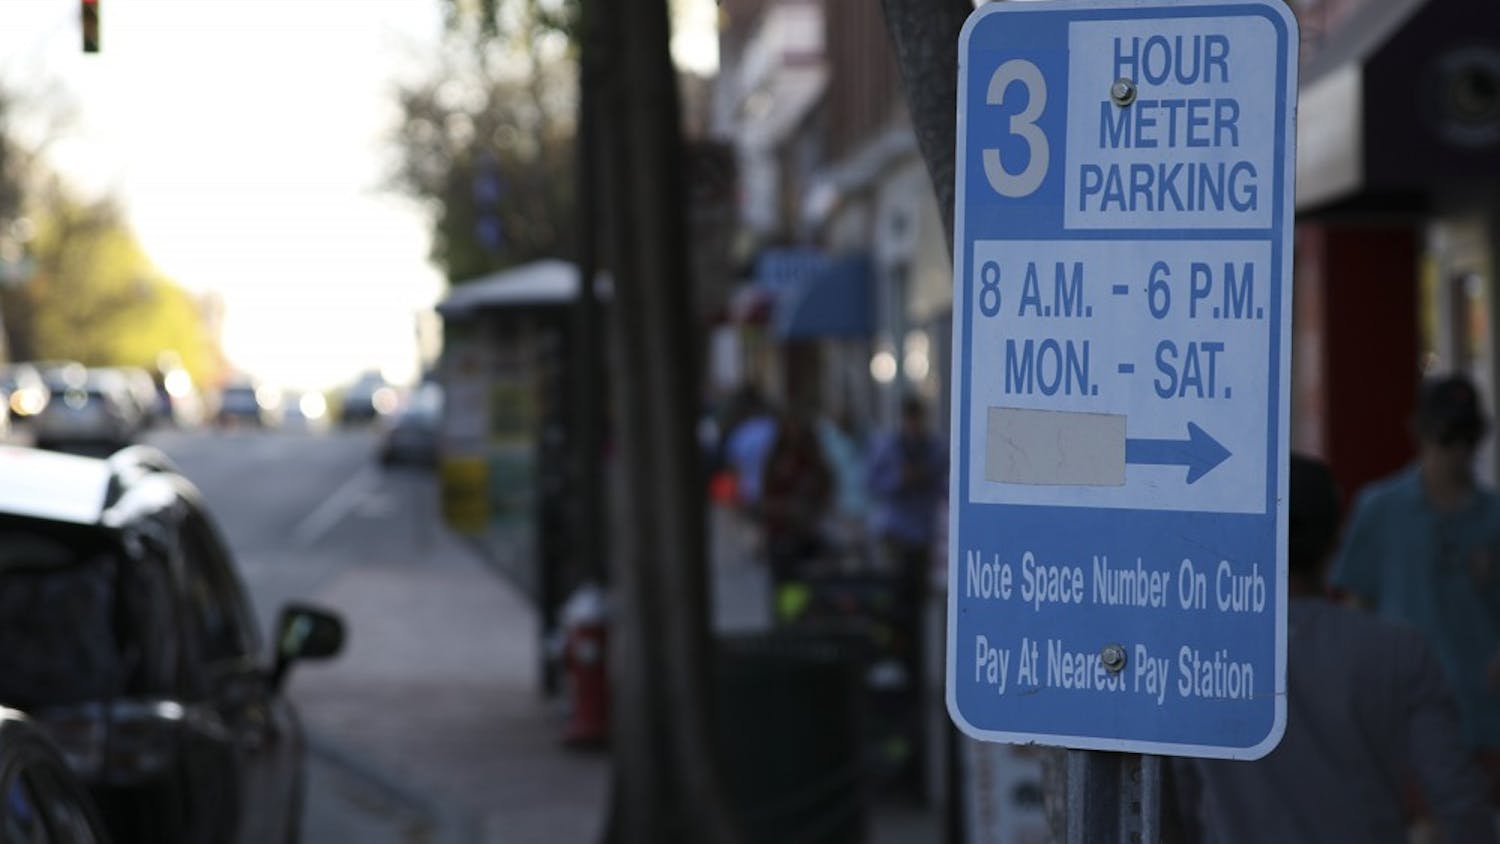 Parking meters now allow people to park on Franklin Street for up to three hour intervals instead of two.